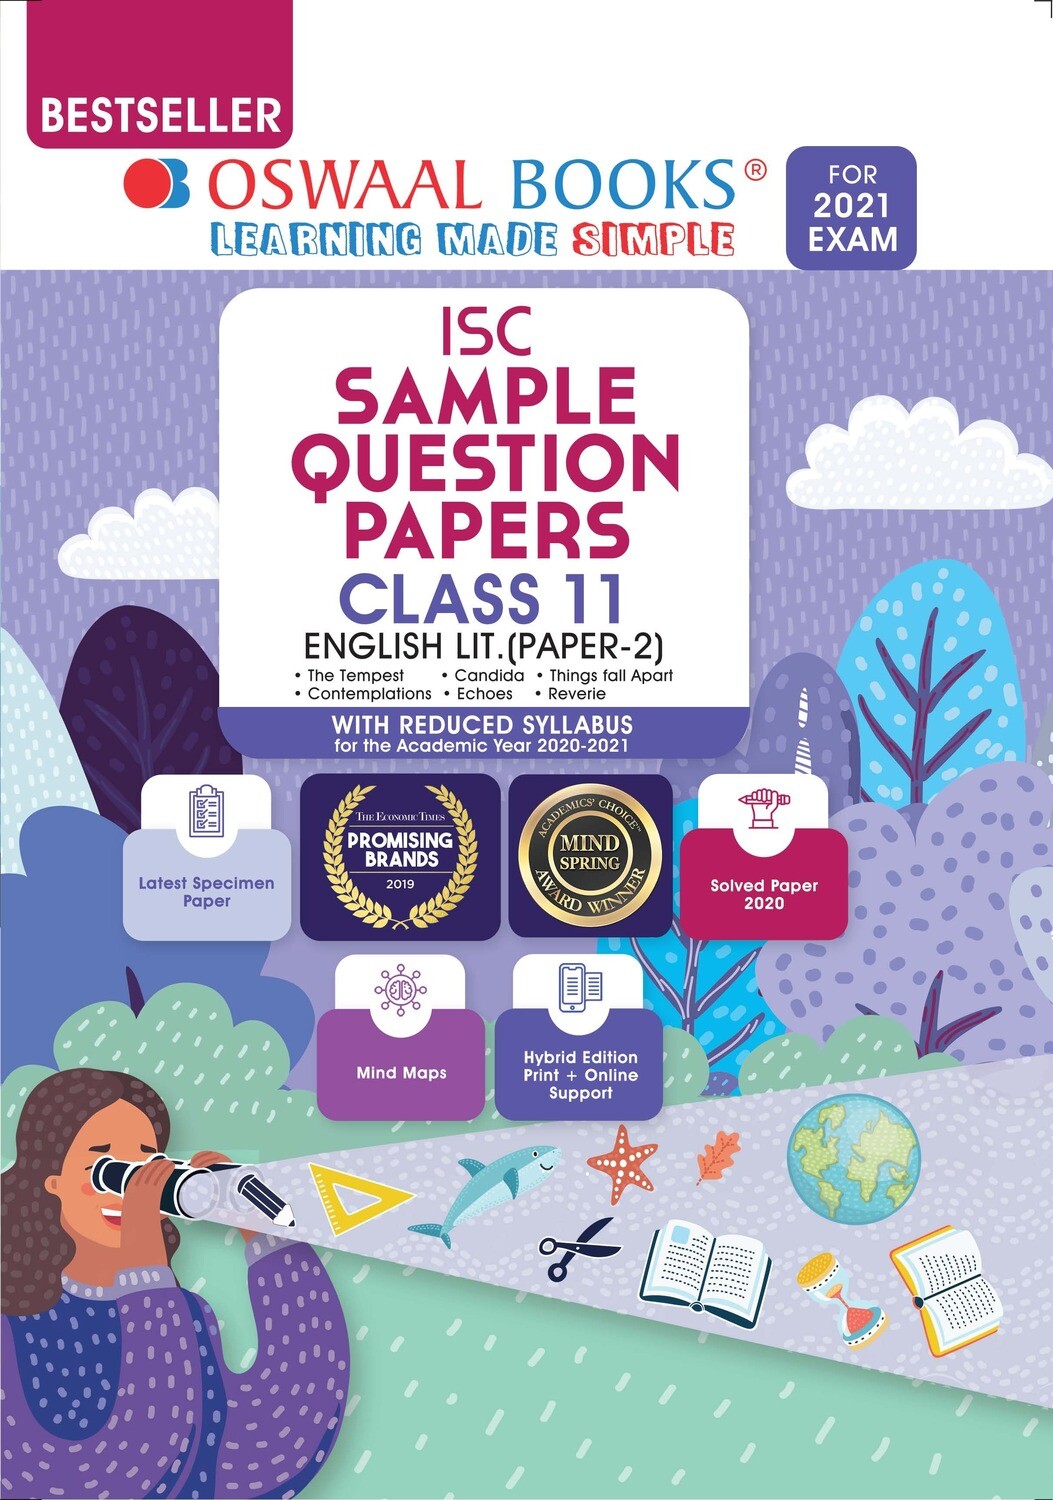 Buy e-book: Oswaal ISC Sample Question Paper Class 11 English Paper 2 Literature (For 2021 Exam)